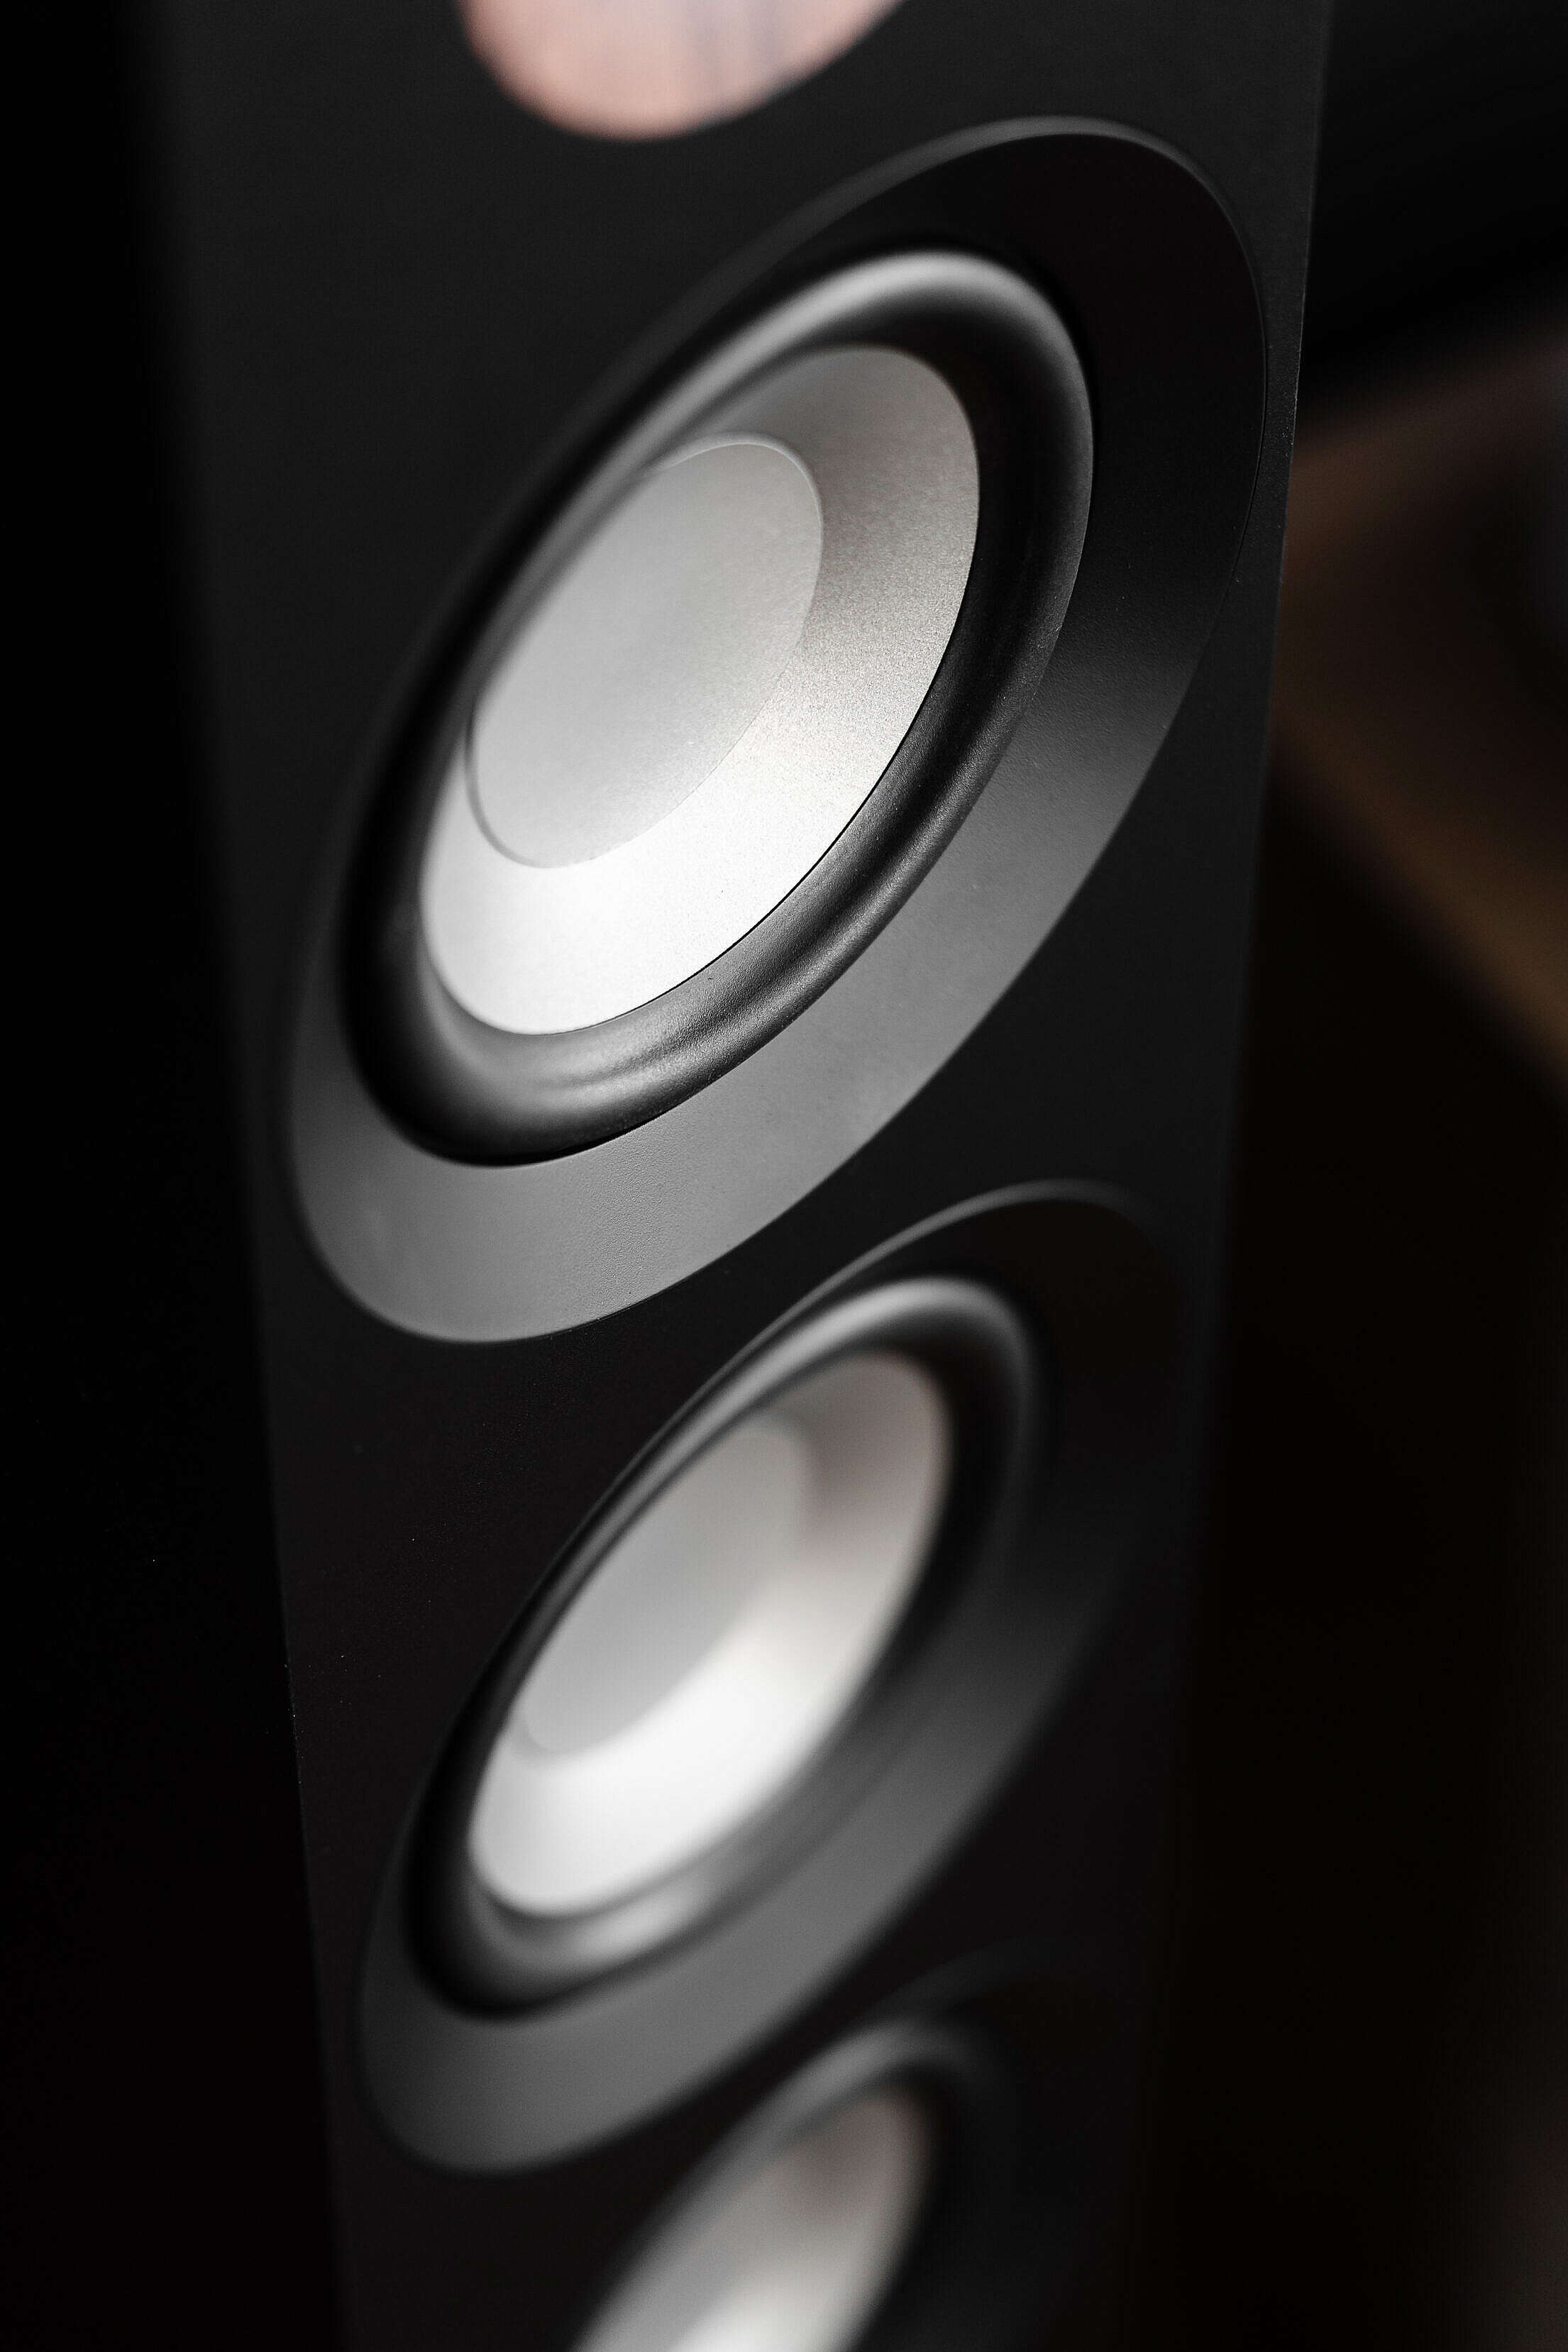 Home Theater Speaker Close Up Free Stock Photo